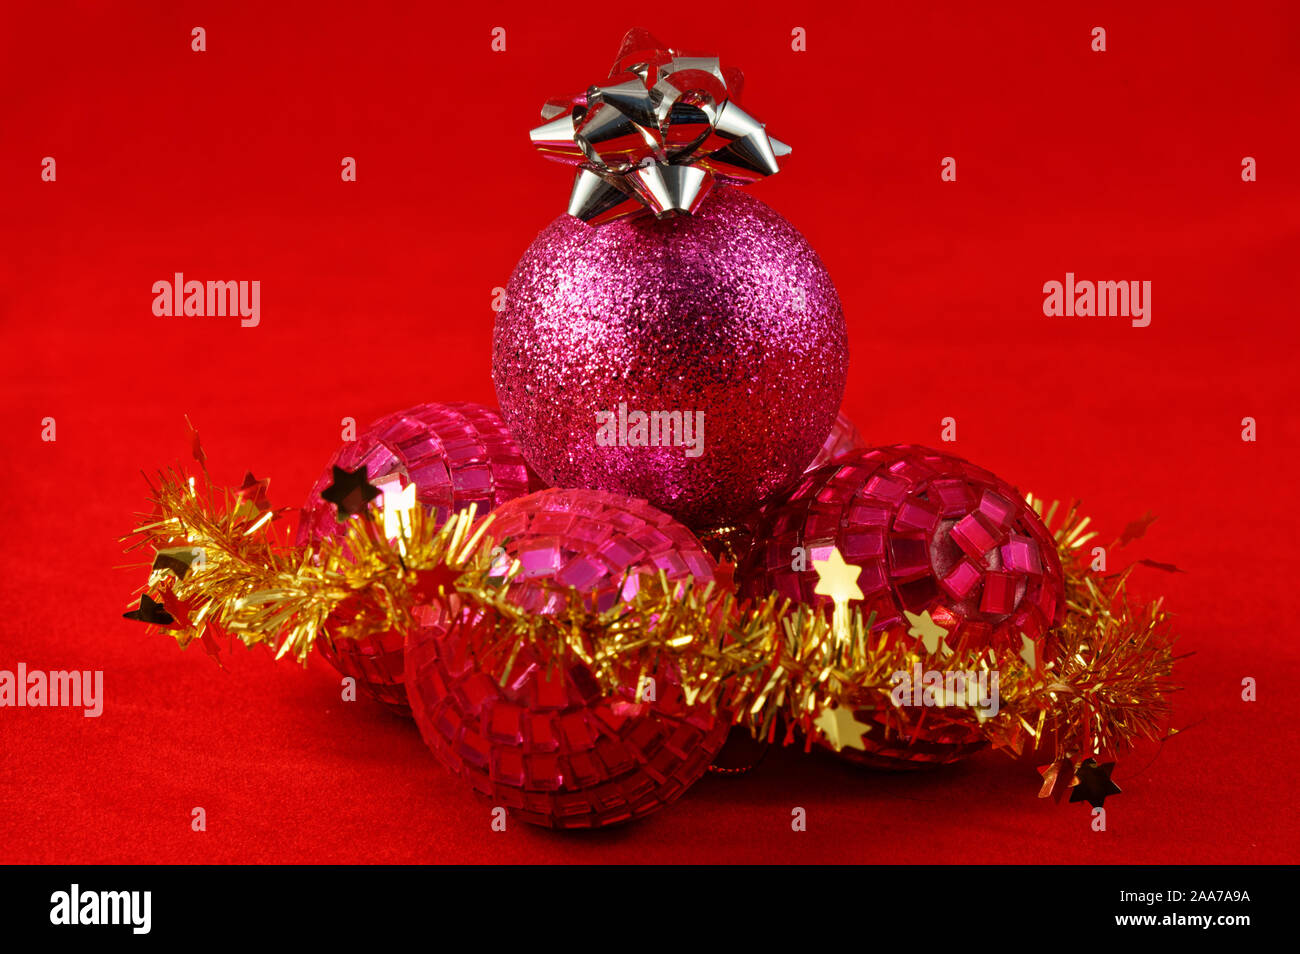 Purple and pink round Christmas baubles with a silver star on top and gold tinsel in front Stock Photo